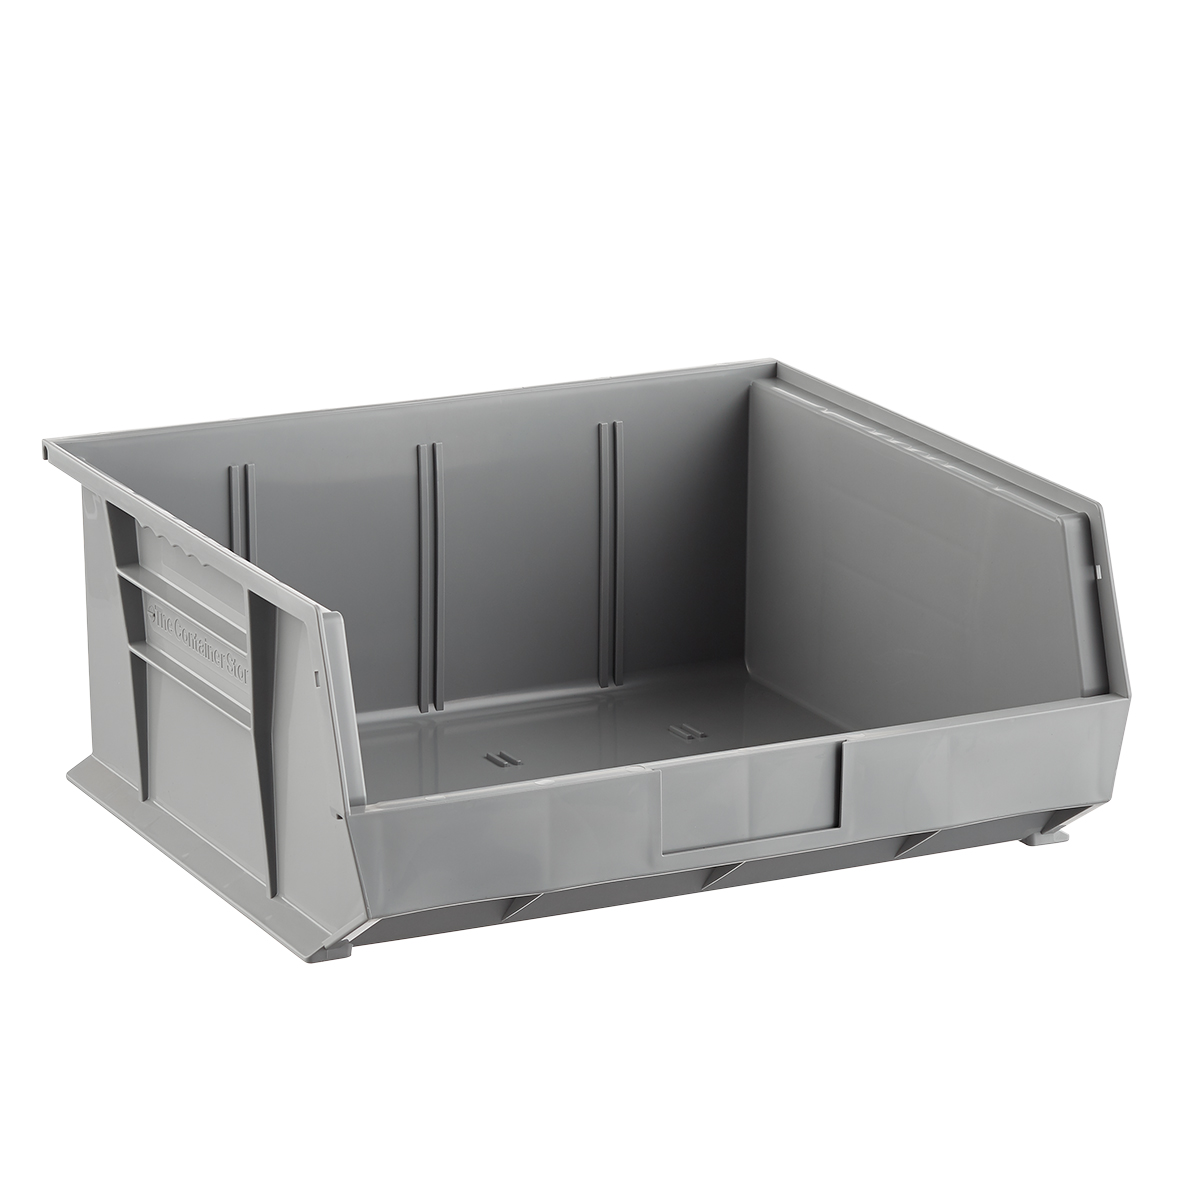 https://www.containerstore.com/catalogimages/388647/10081023-stackable-plastic-utility-b.jpg